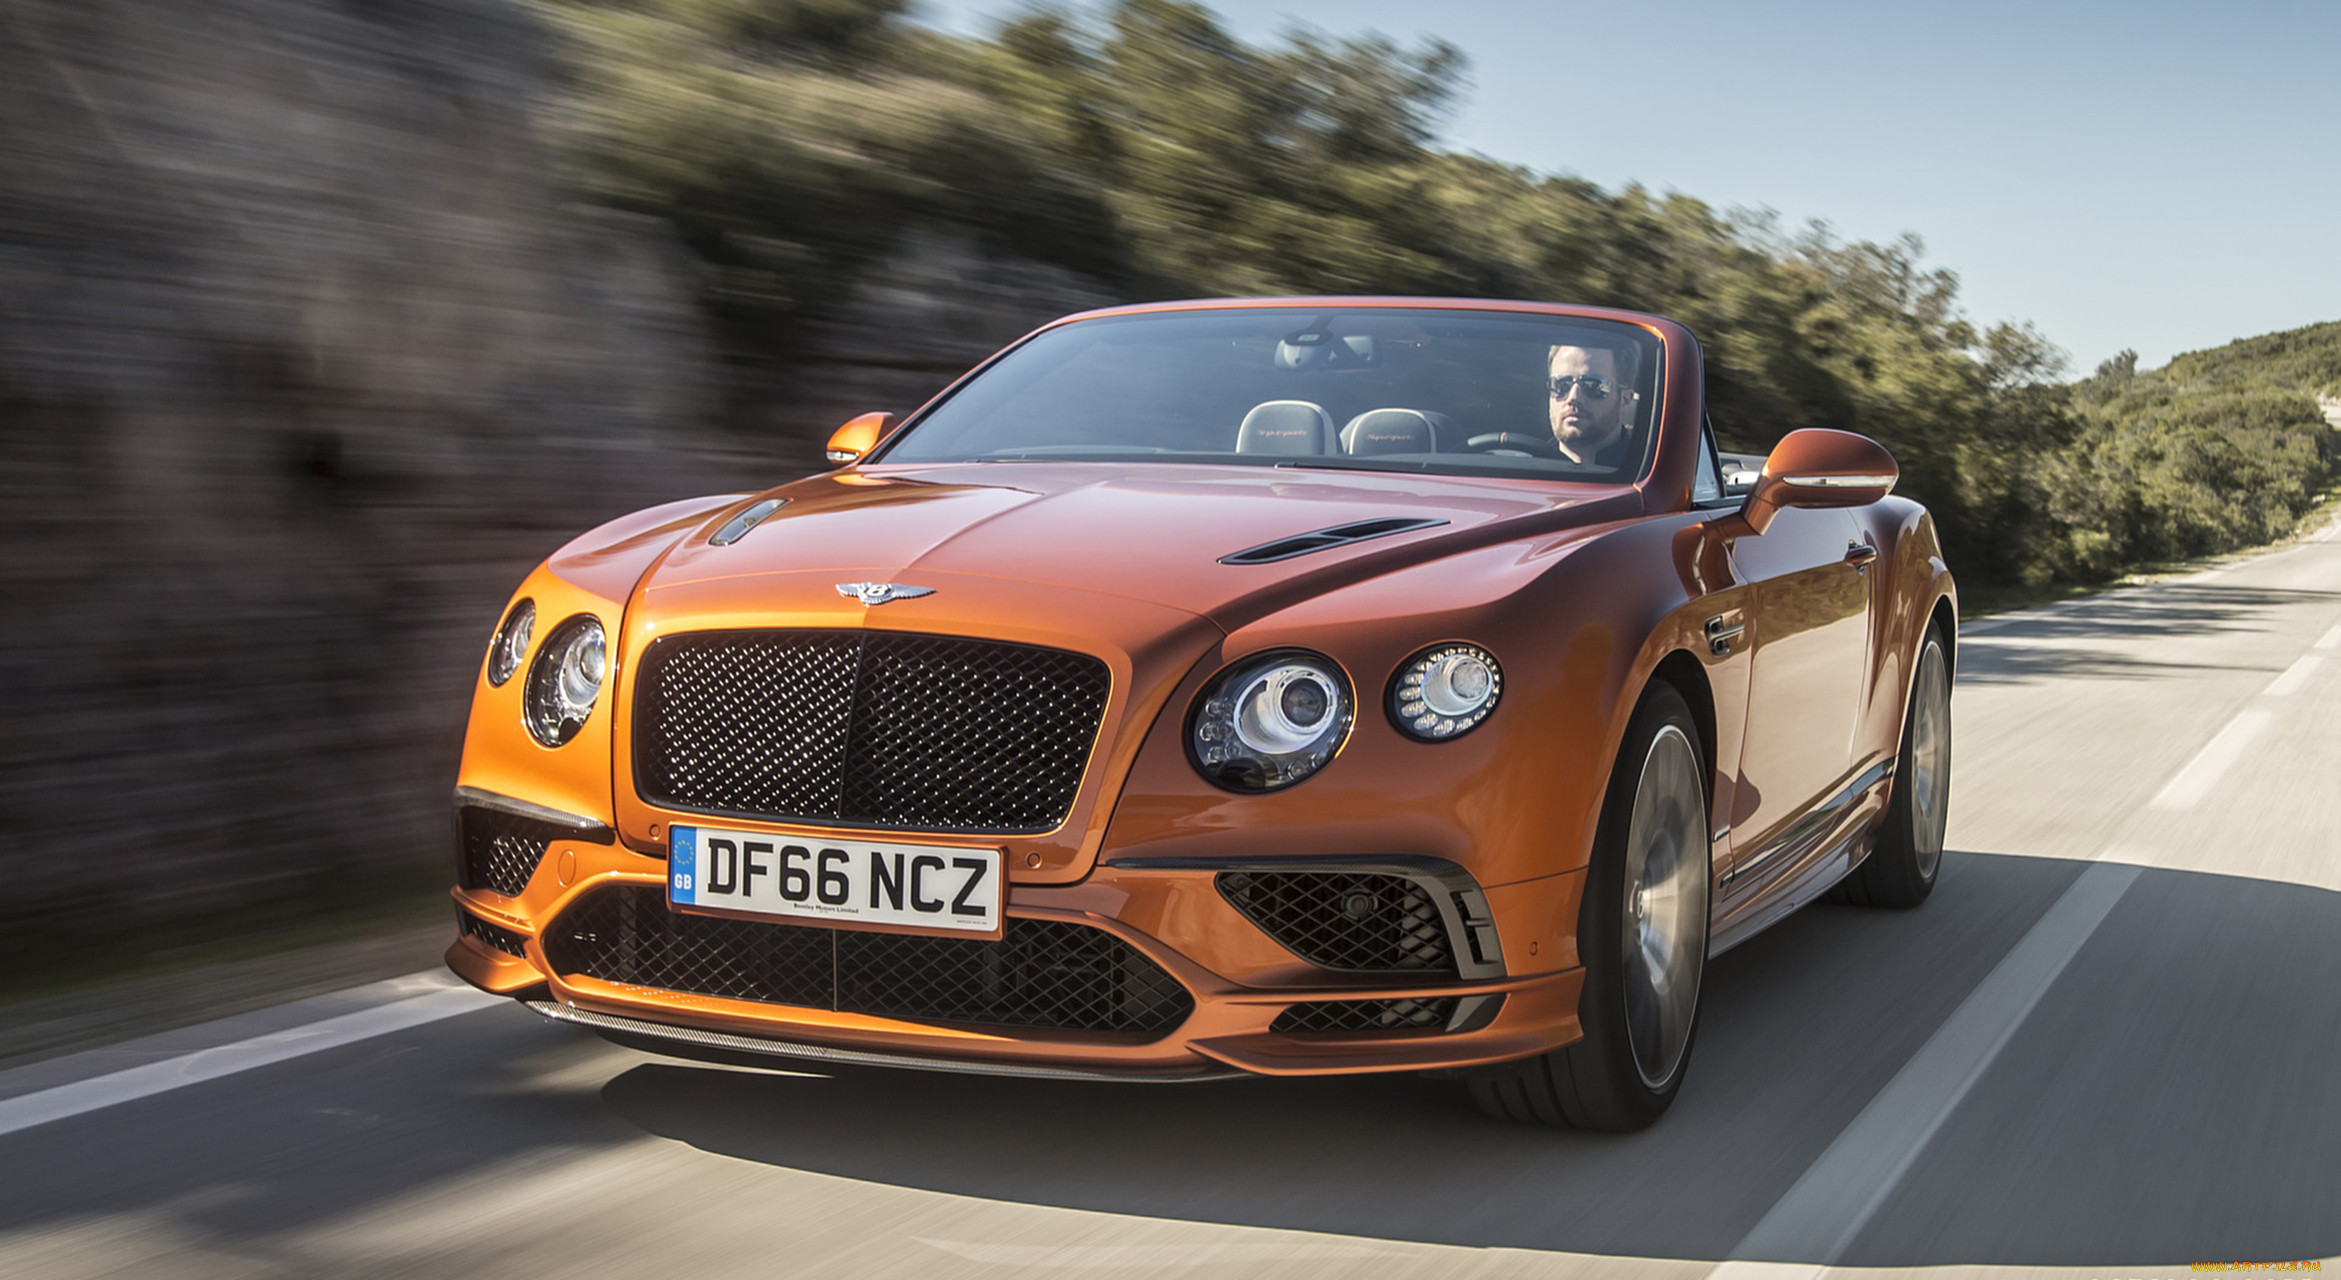 bentley continental gt supersports convertible 2018, , bentley, gt, continental, 2018, convertible, supersports